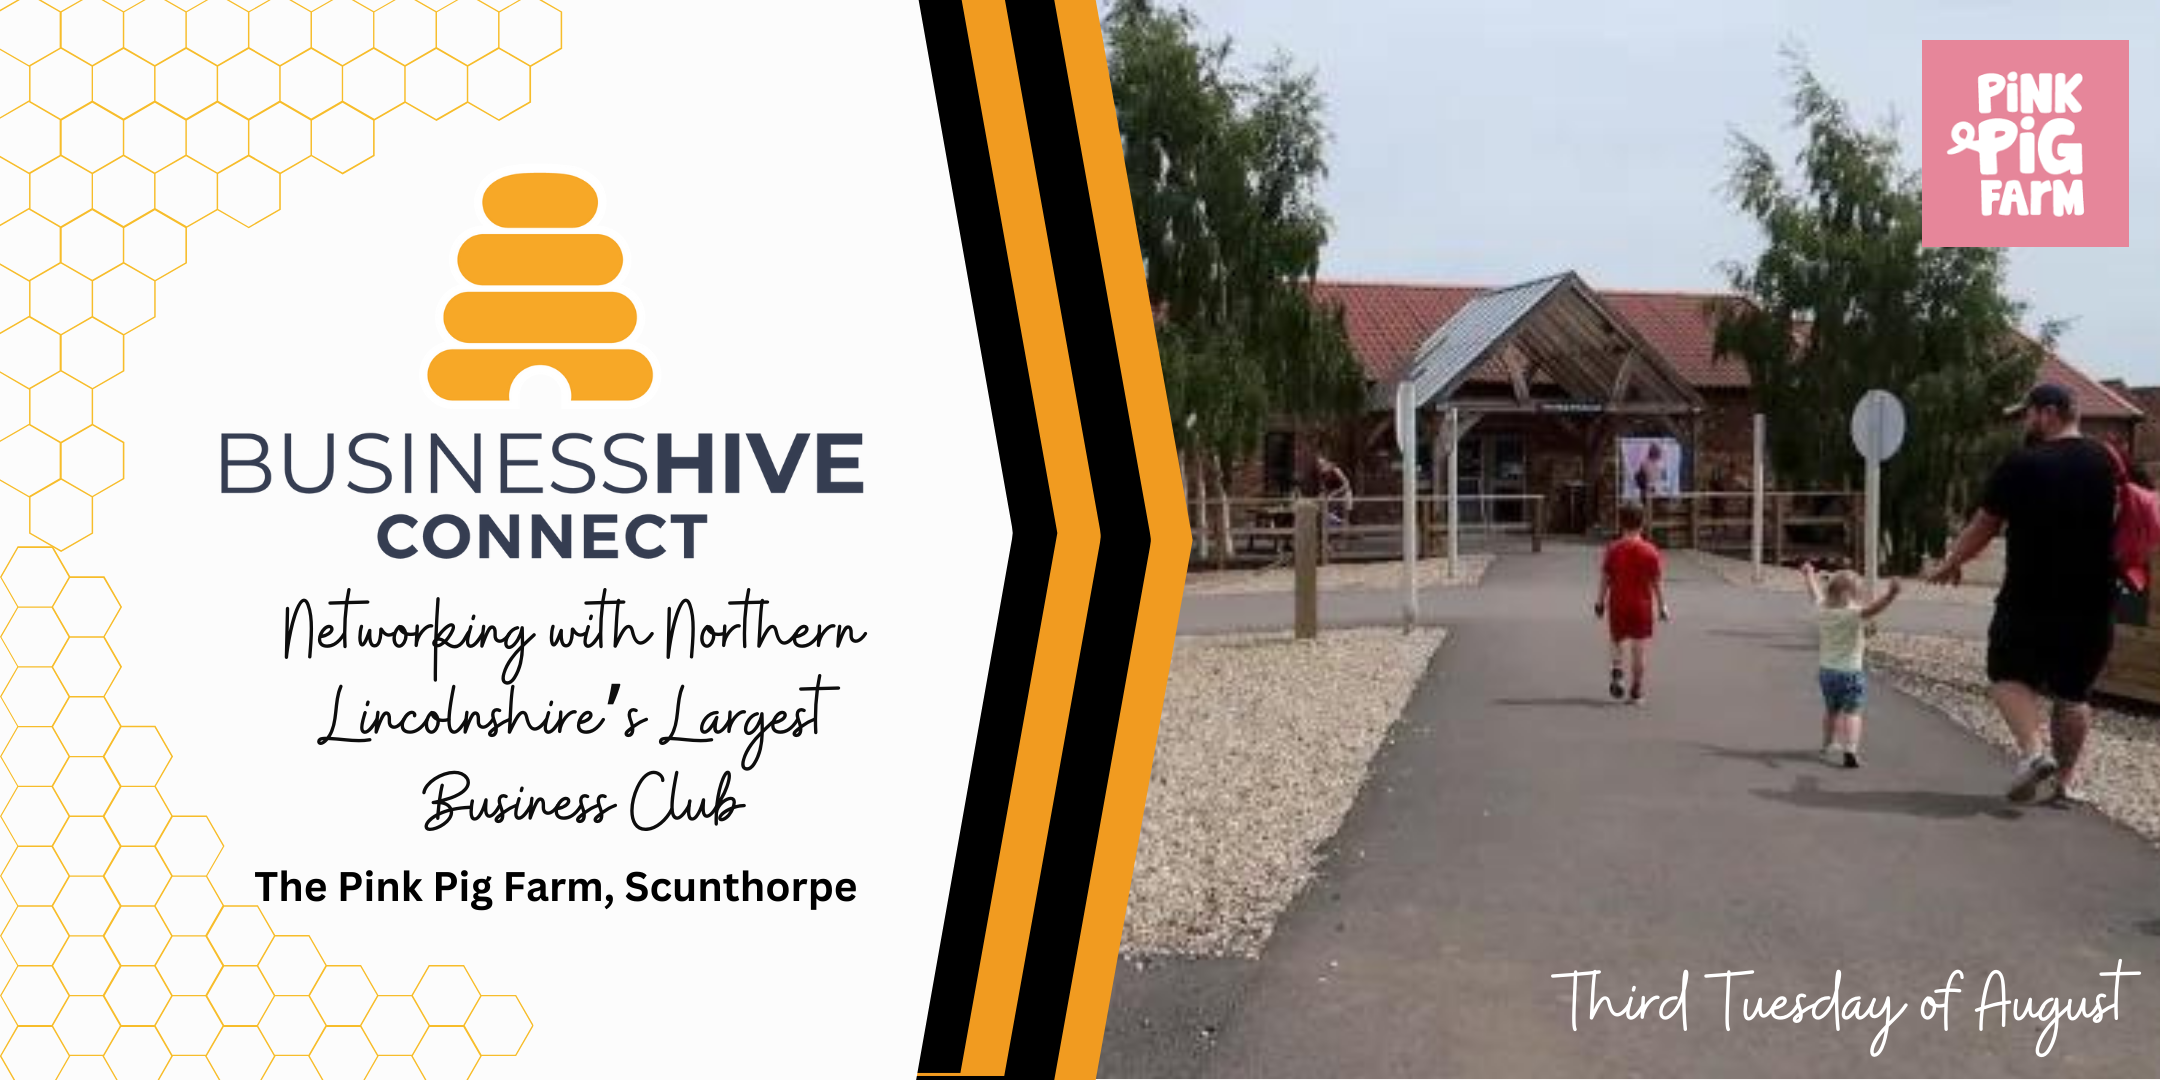 An event poster for Business Hive Connect at The Pink Pig Farm, Scunthorpe, on the third Tuesday of August. The image shows an adult and two children walking towards the farm entrance, perfect for illustrating the family-friendly atmosphere of this networking event.